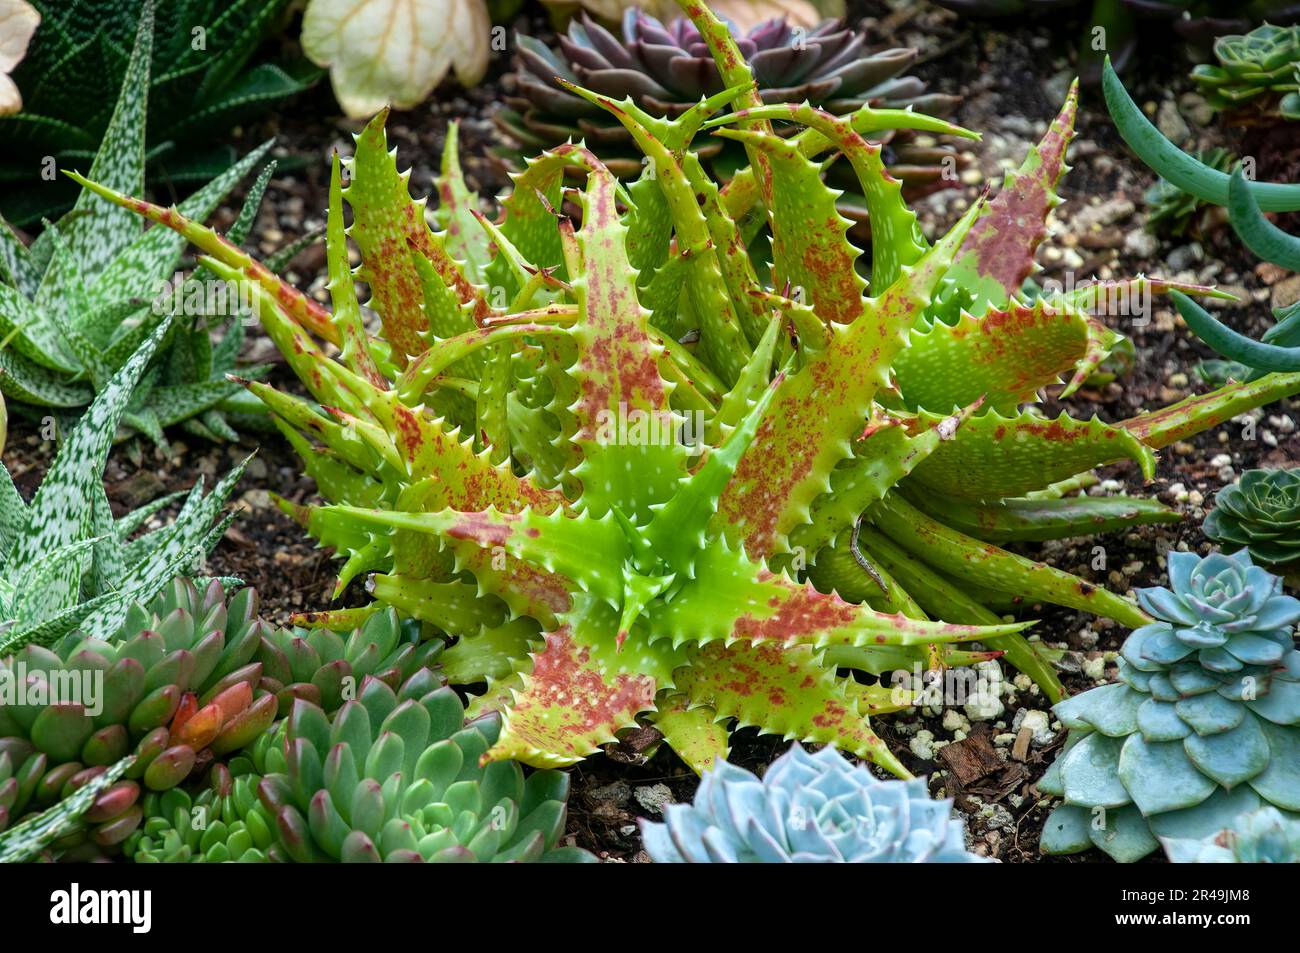 Sydney Australia, Aloe buettneri or Aloe congolensis in rock garden. Leaves turn reddish-brown when the plant is under drought or cold stress. Stock Photo